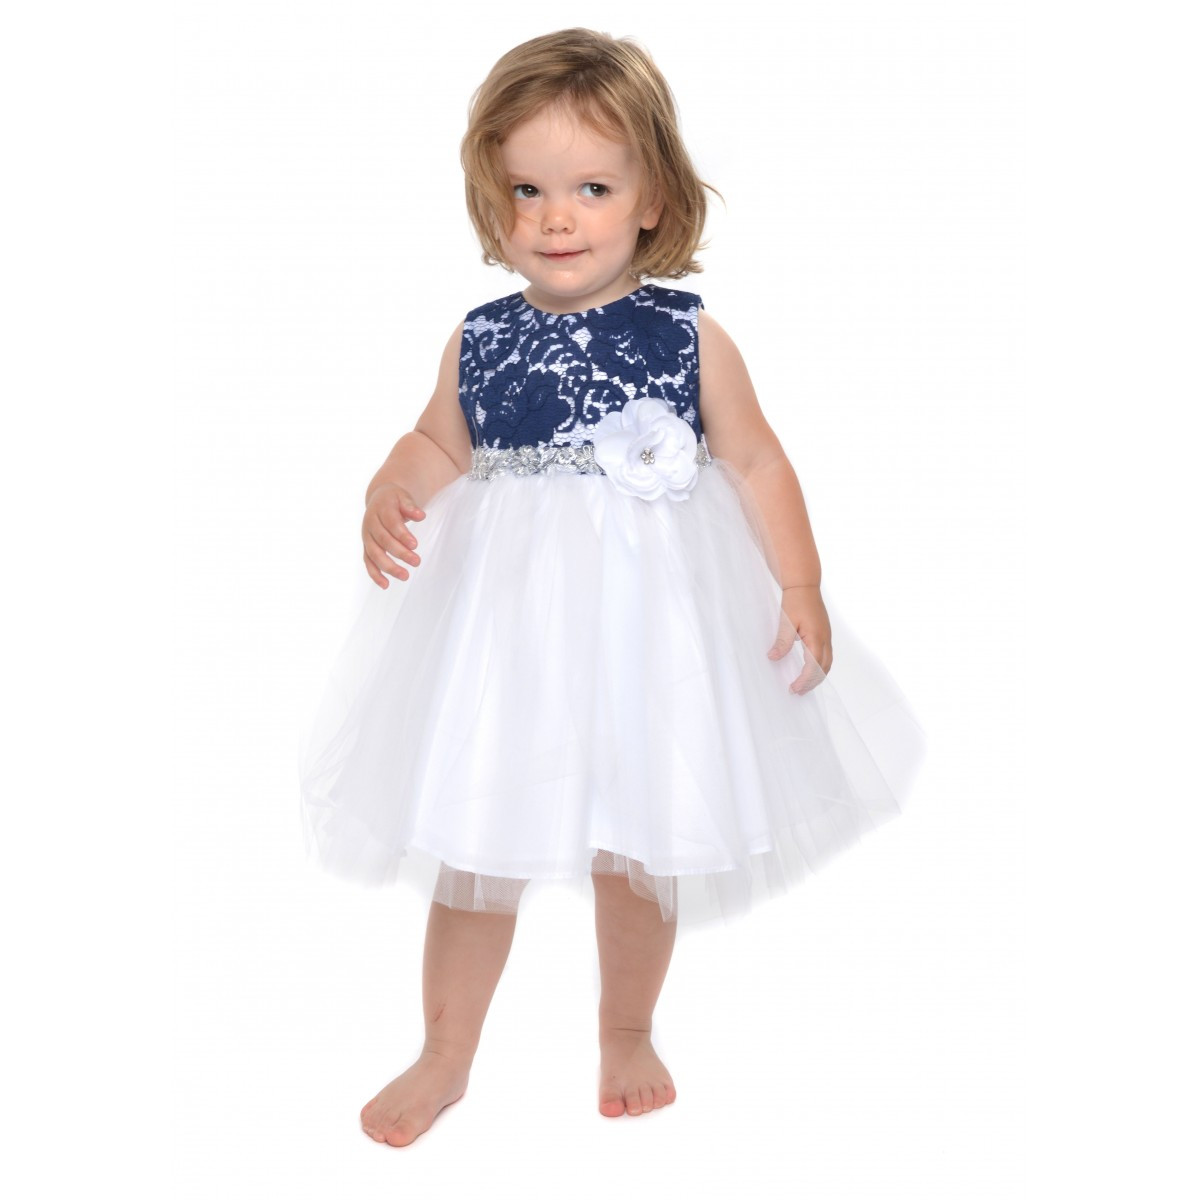 Party Dresses Baby
 Stunning Baby Toddler Party Dress 6 24 months with Navy Lace